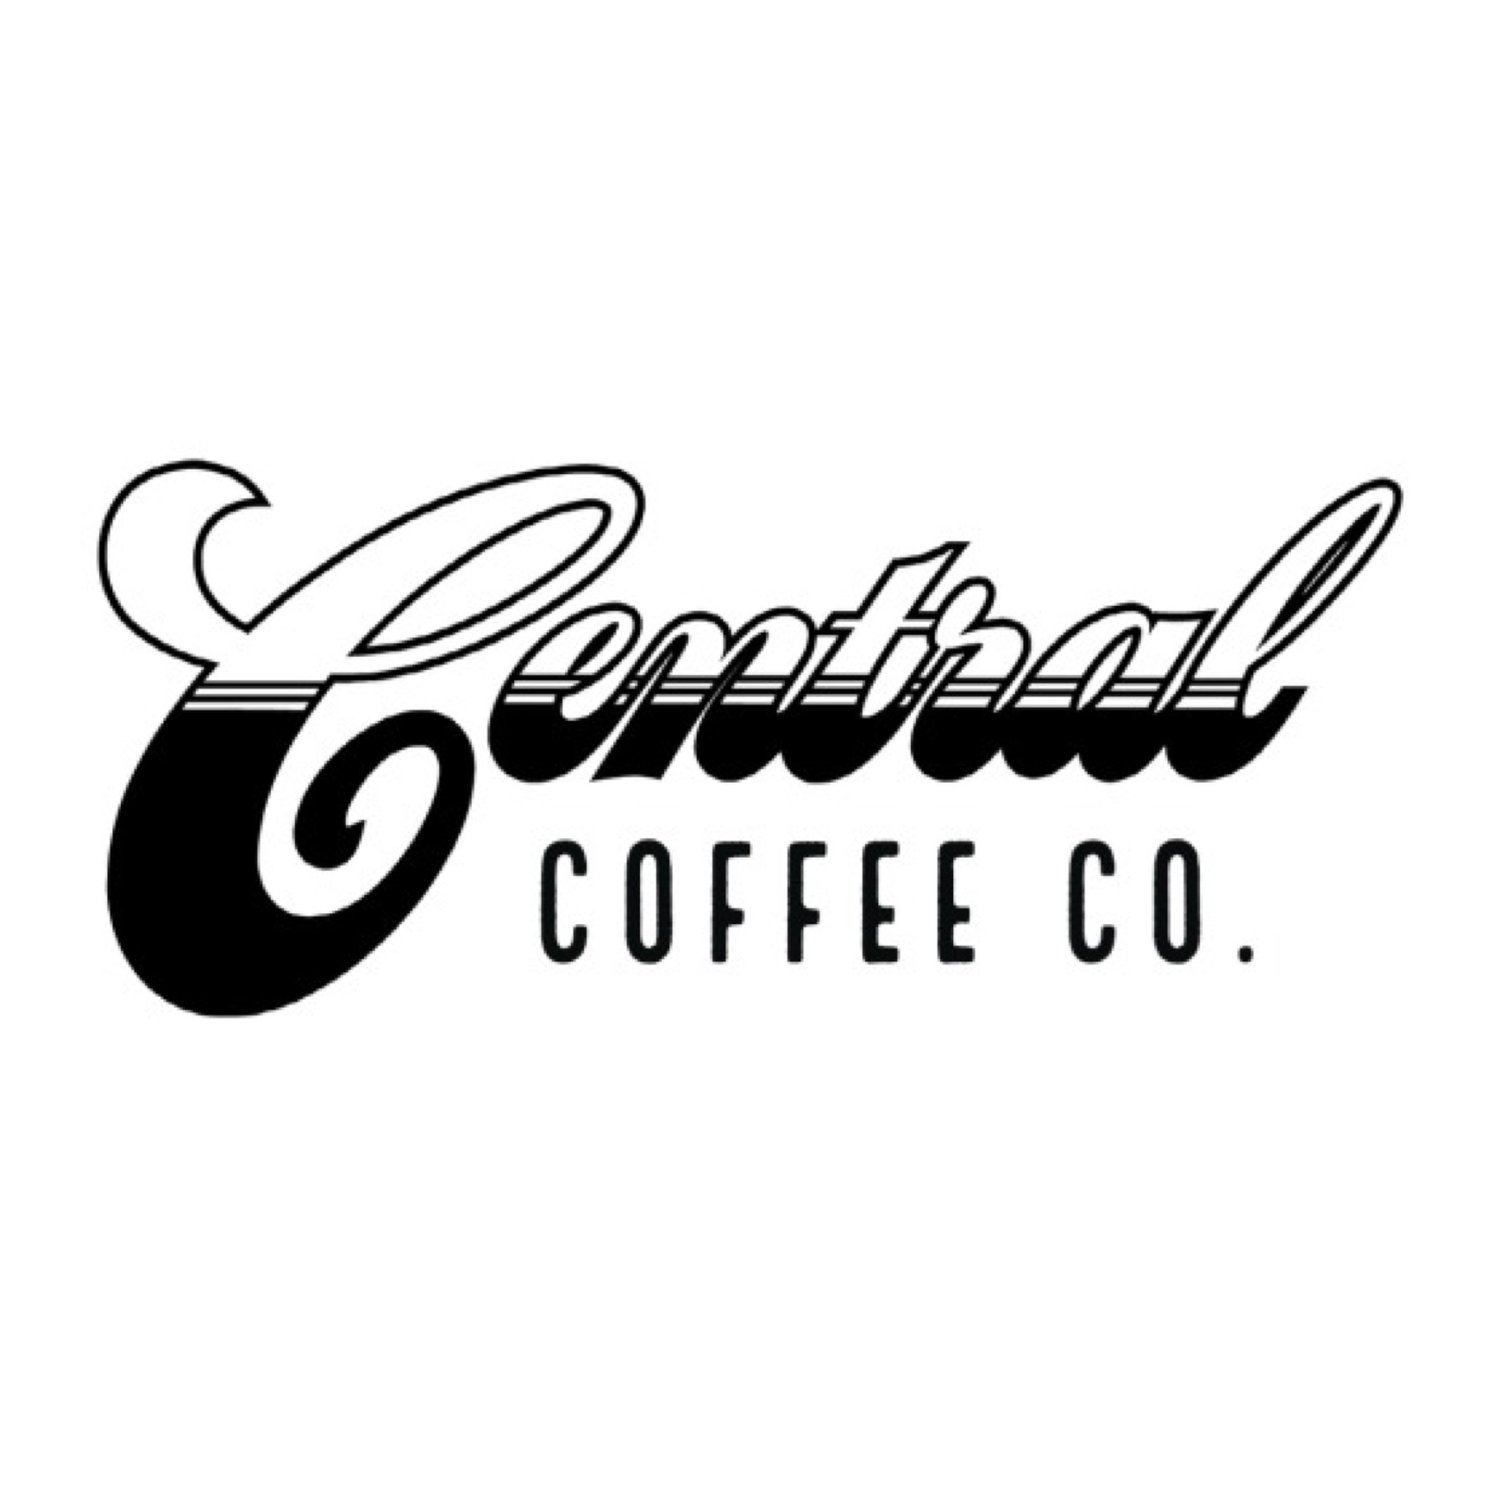 Central Coffee Co.